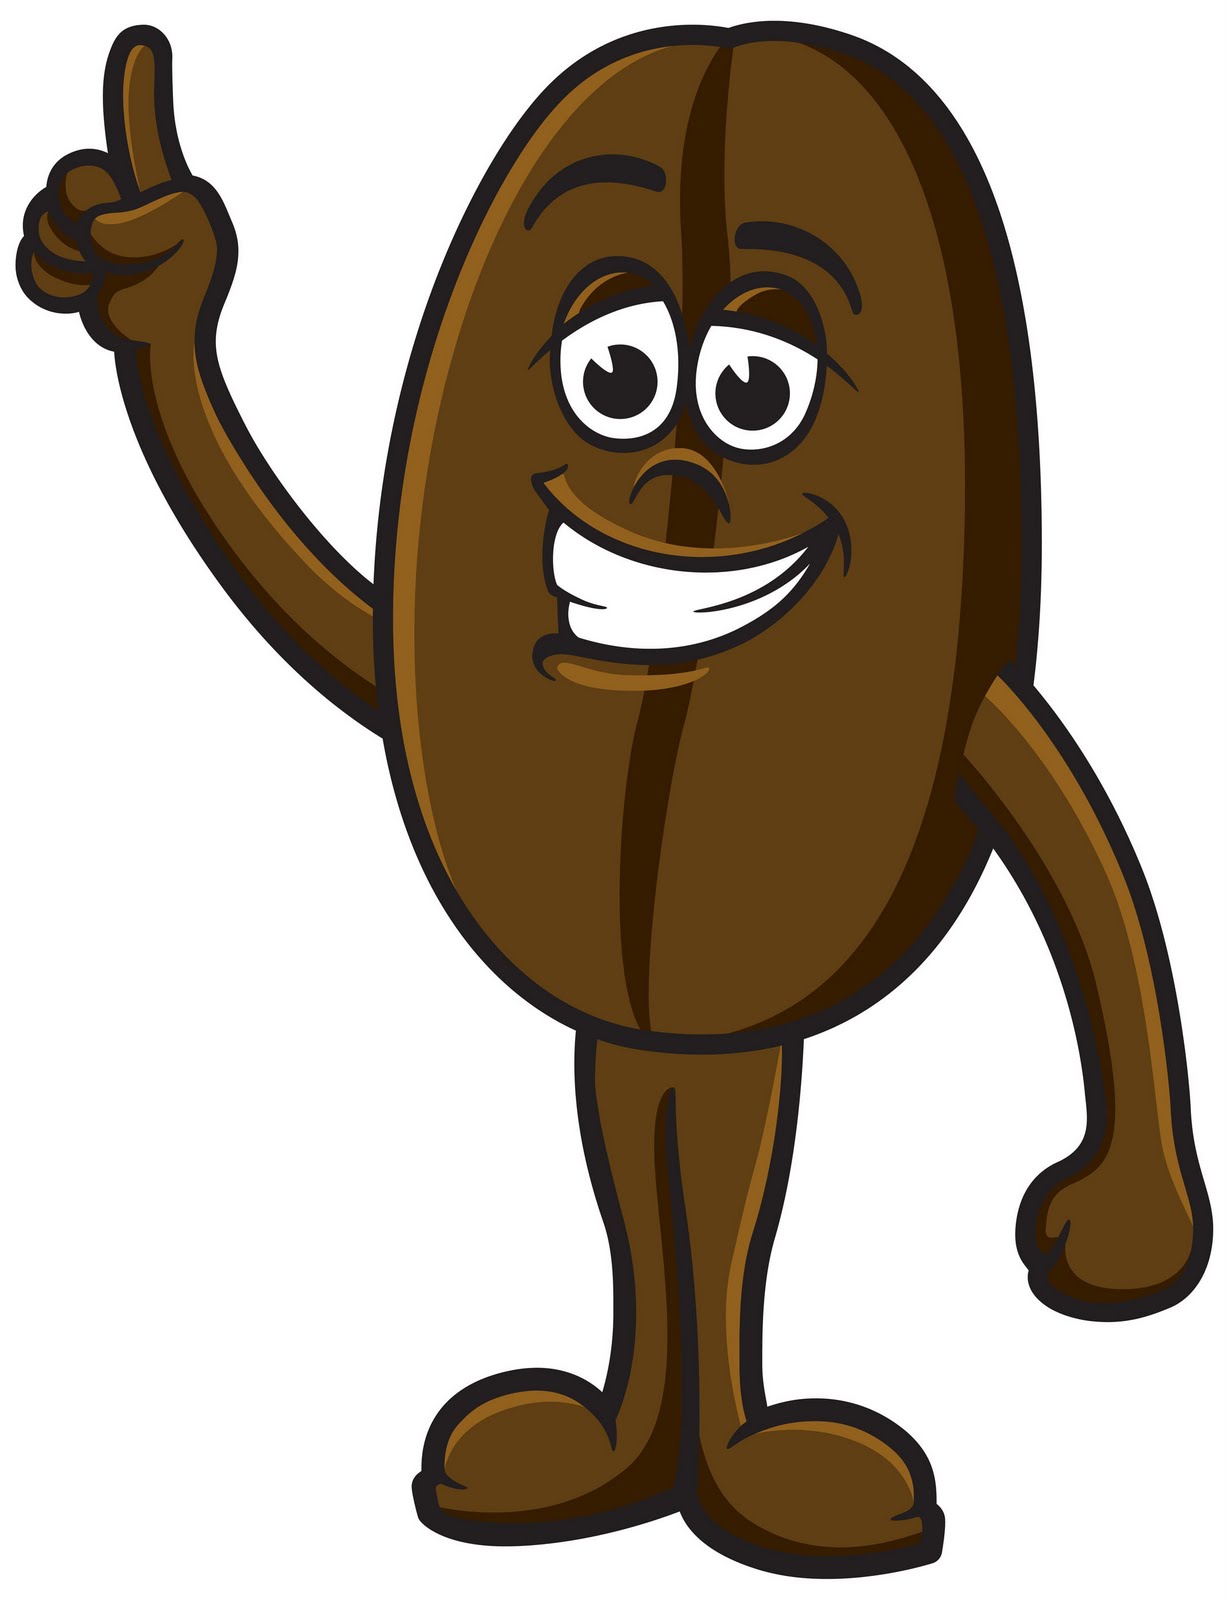 Coffee cliparts and others. Bean clipart cartoon